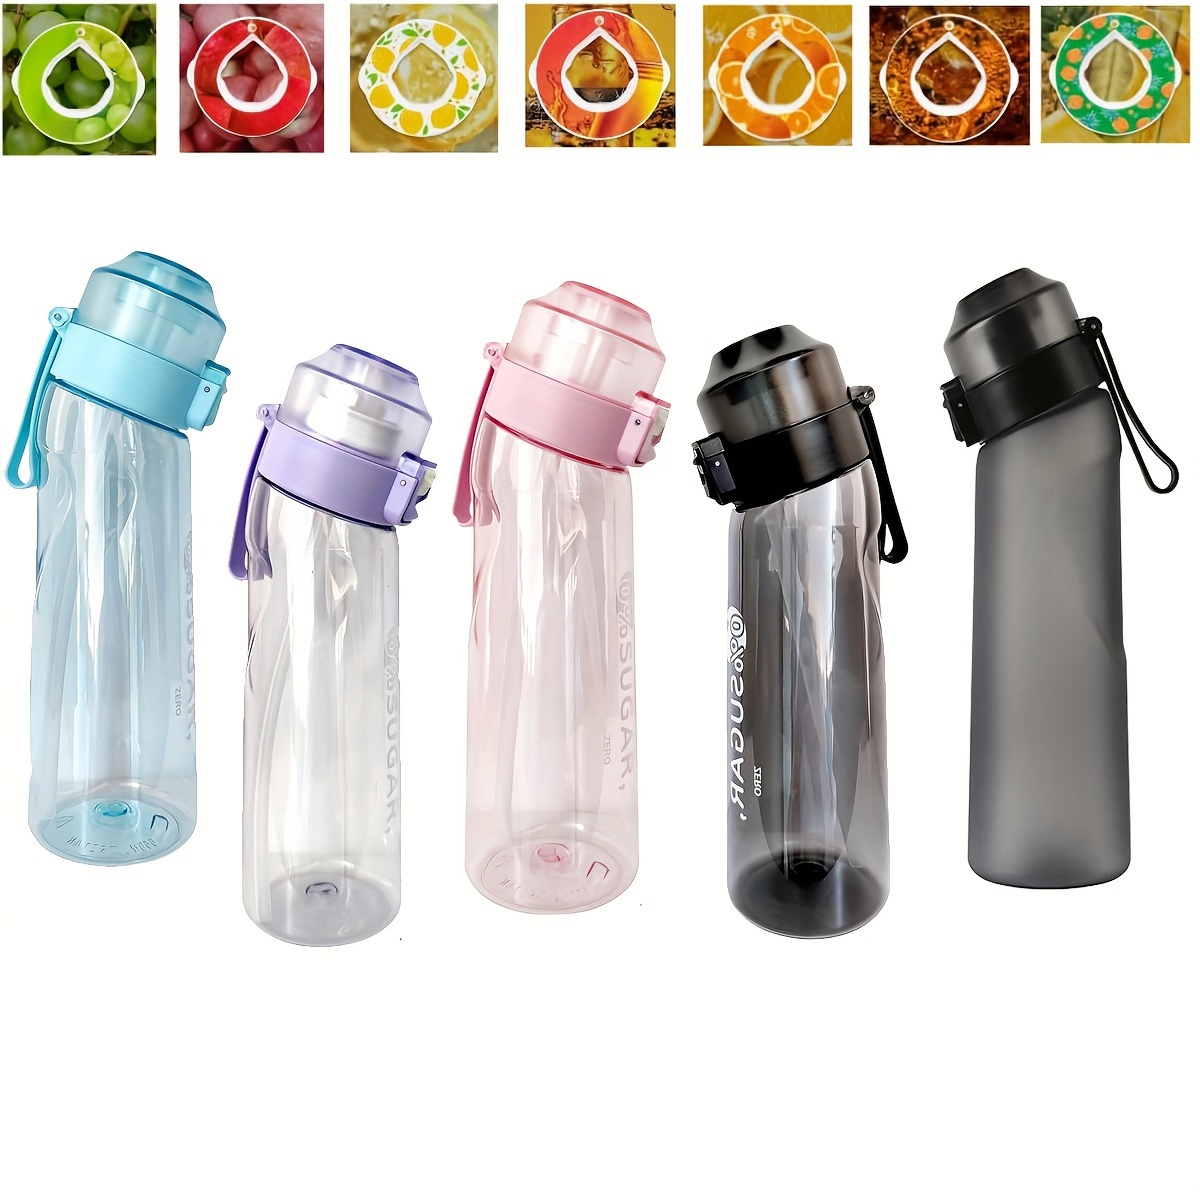 NEW Multi-functional DIY Juicer Cup 650ML Frosted Plastic Crystal